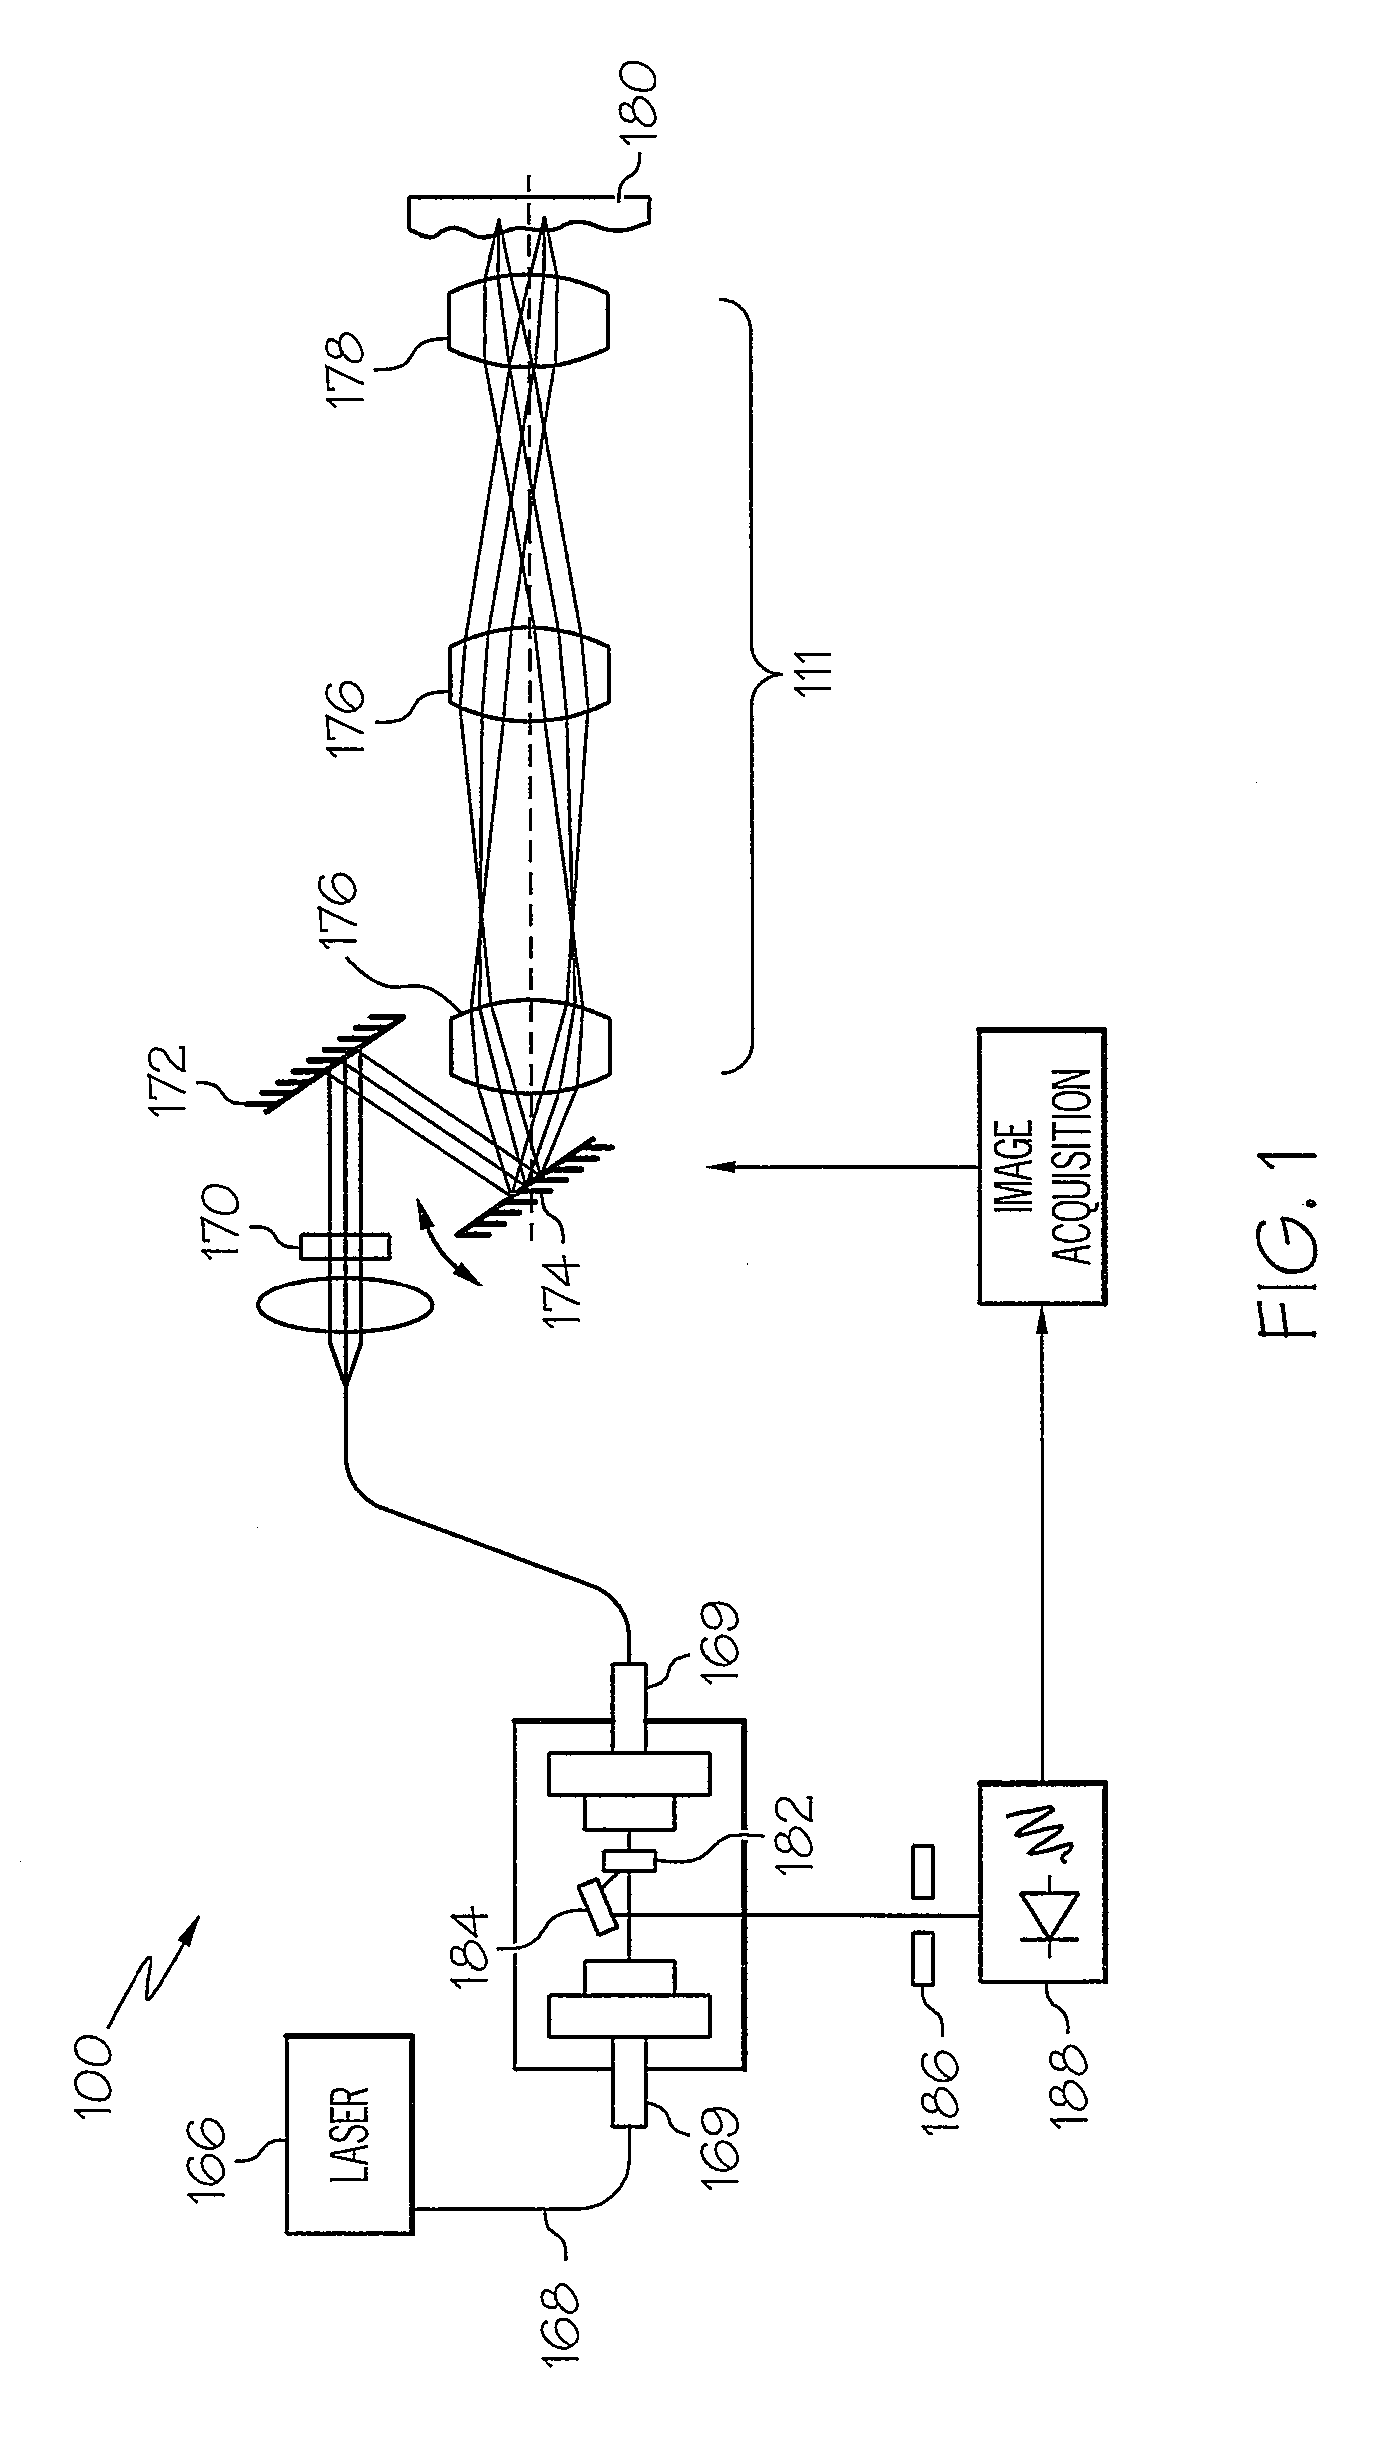 Method for Fabricating a Micromirror with Self-Aligned Actuators